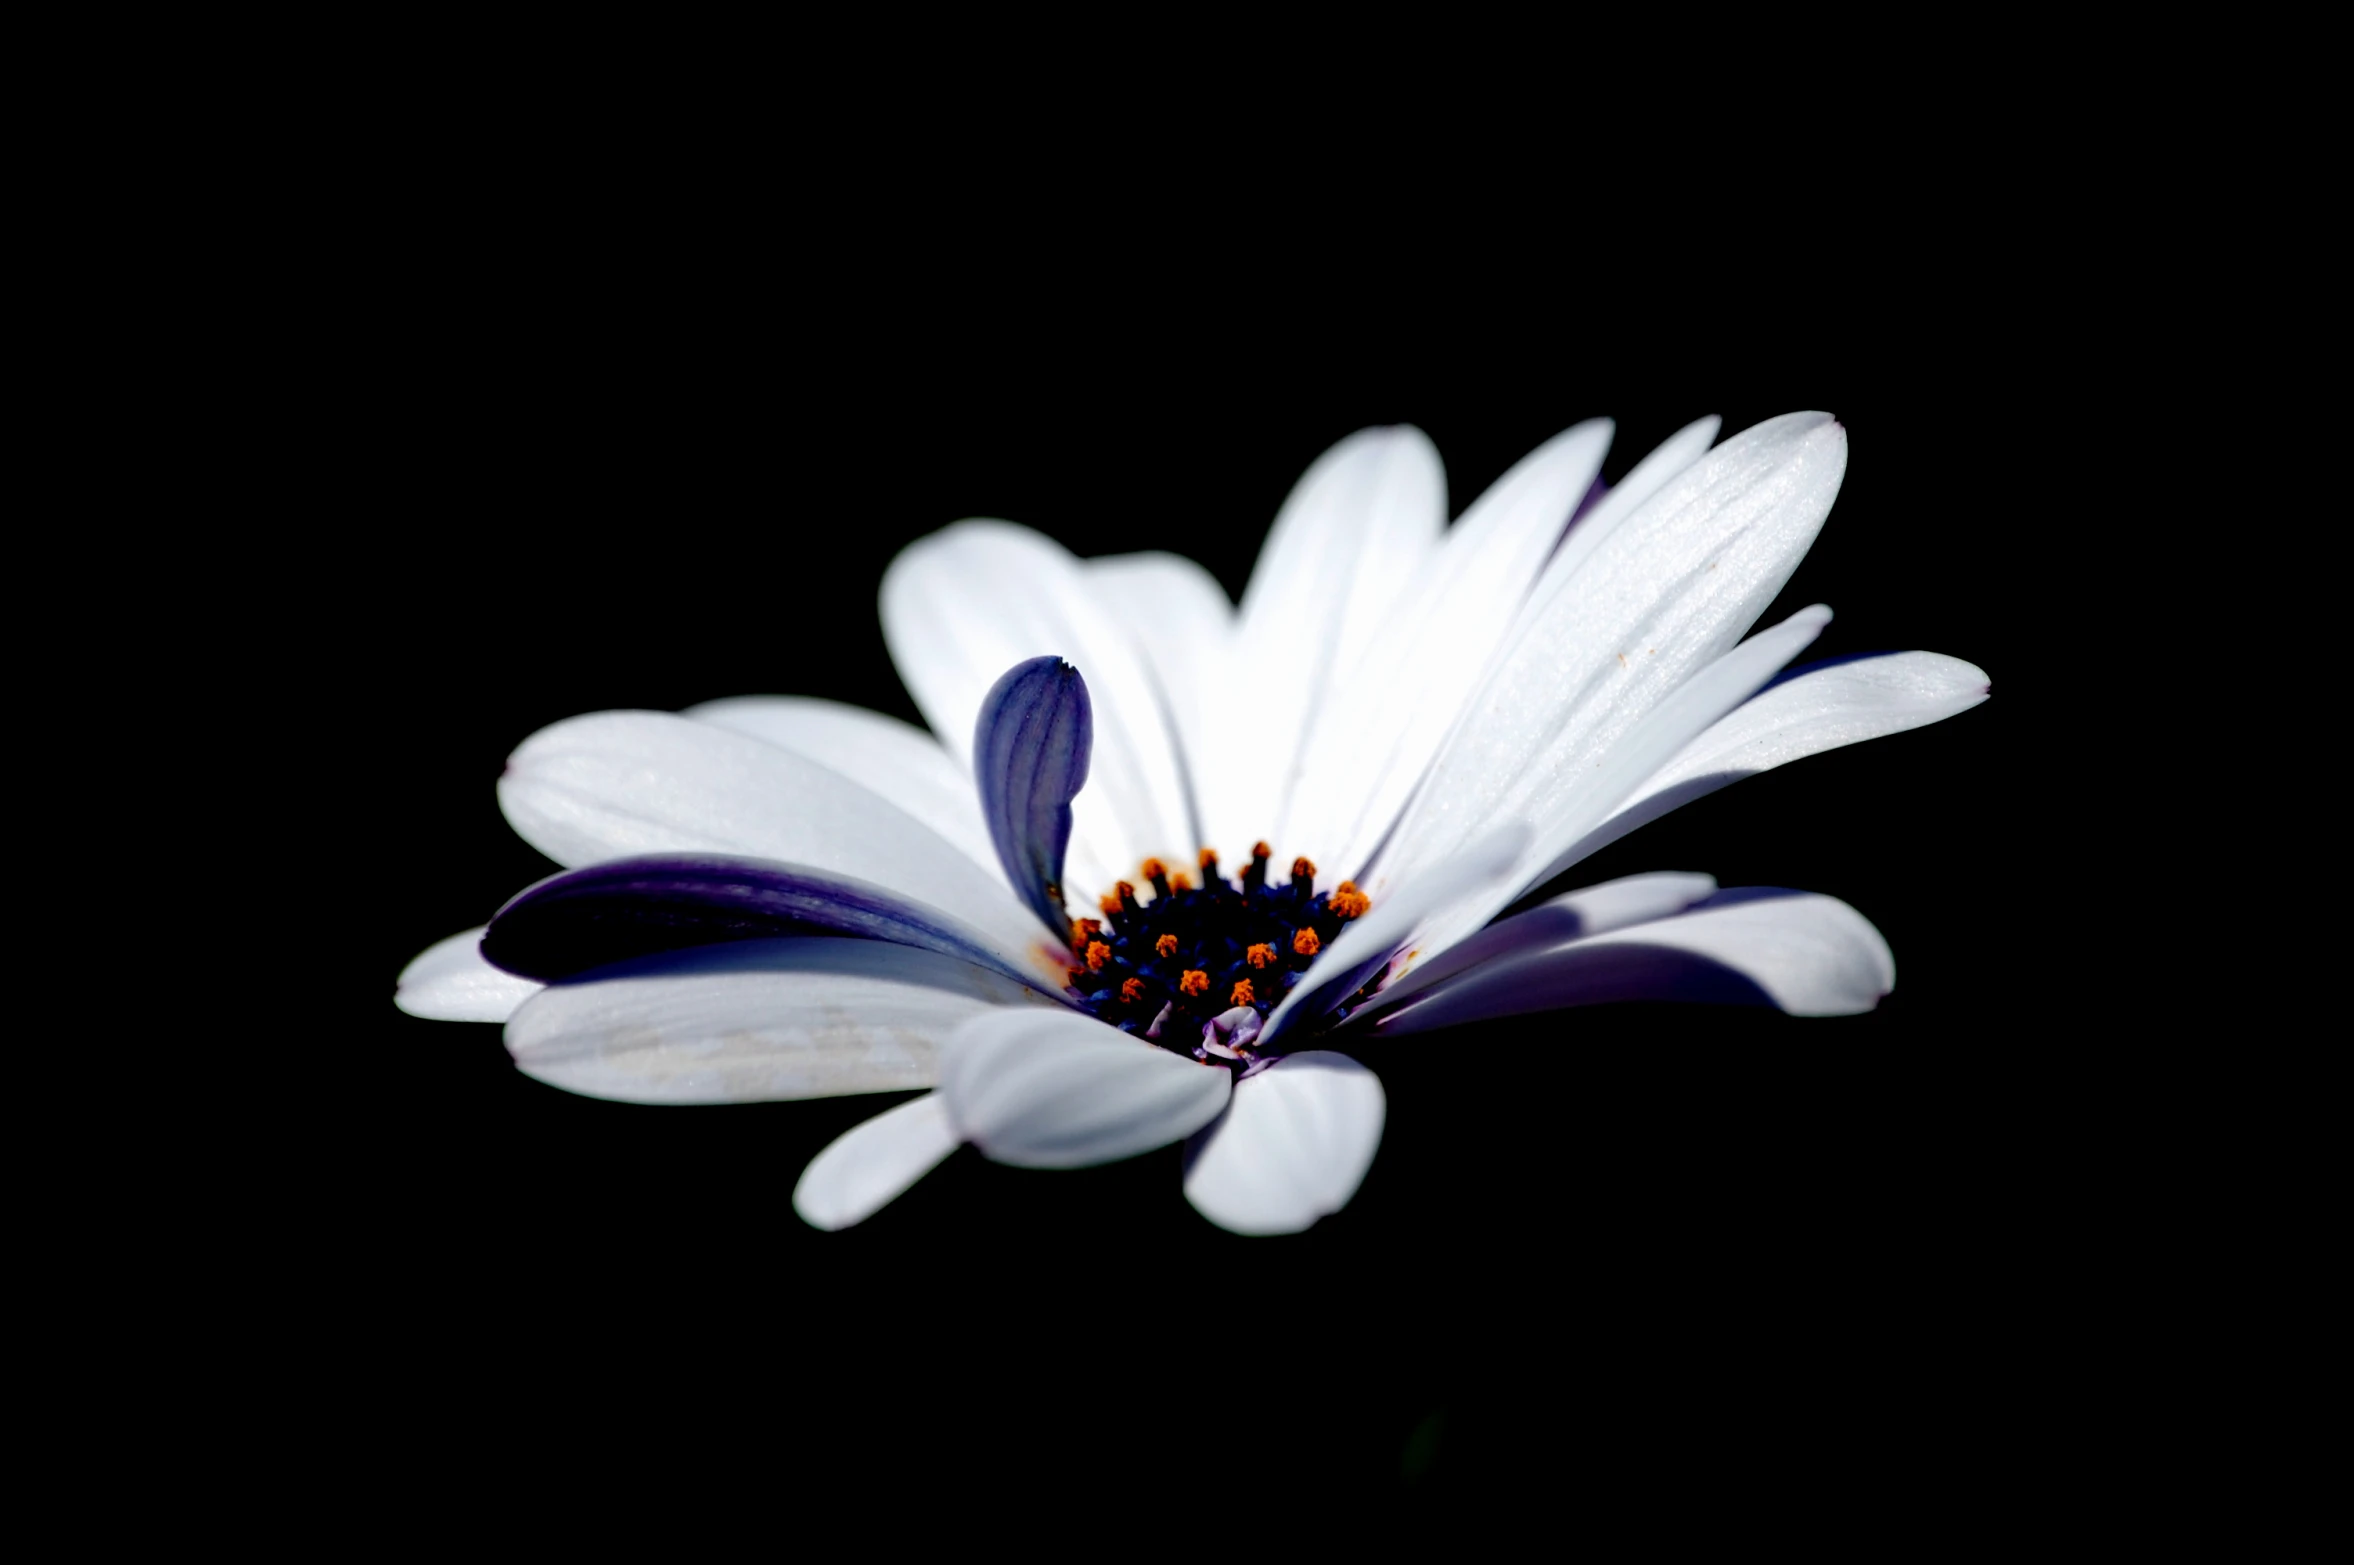 white flowers with blue centers on a black background